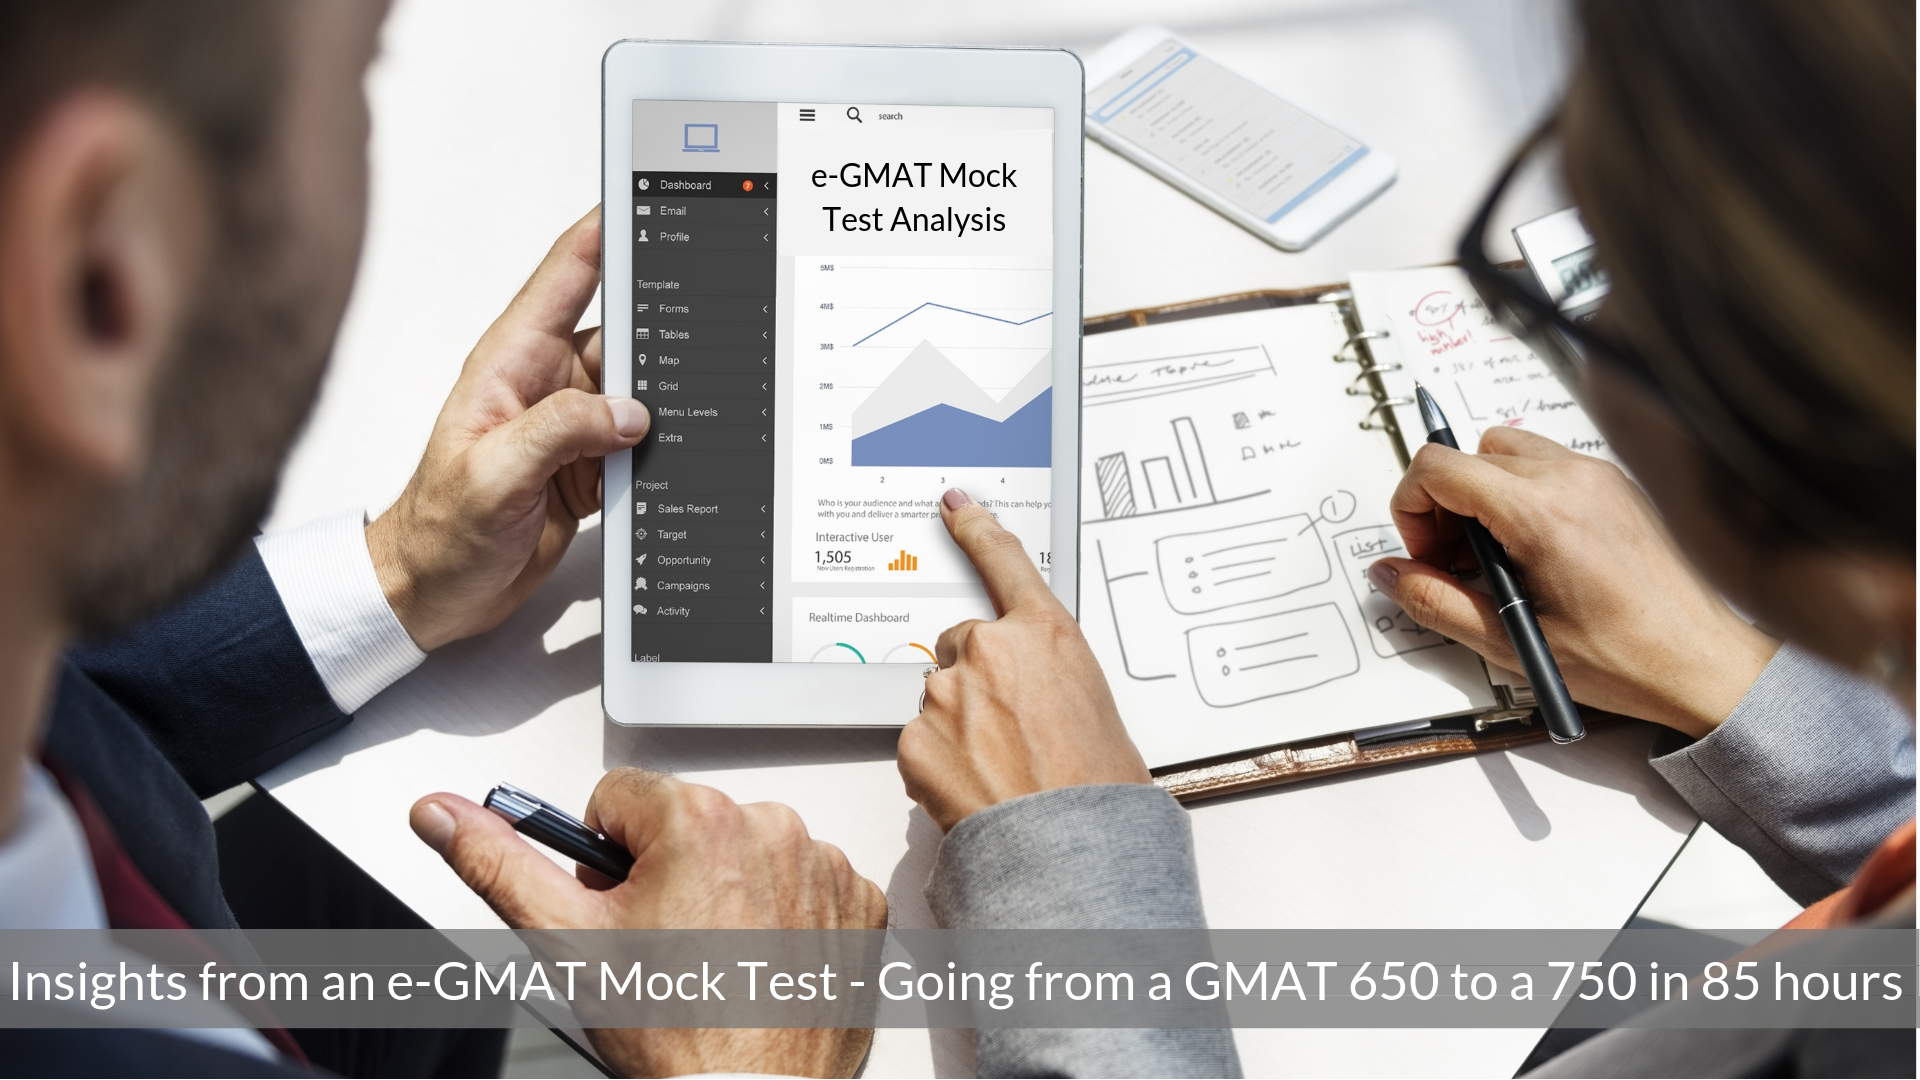 Insights from an e-GMAT Mock Test – Going from a GMAT 650 to a 750 in 85 hours